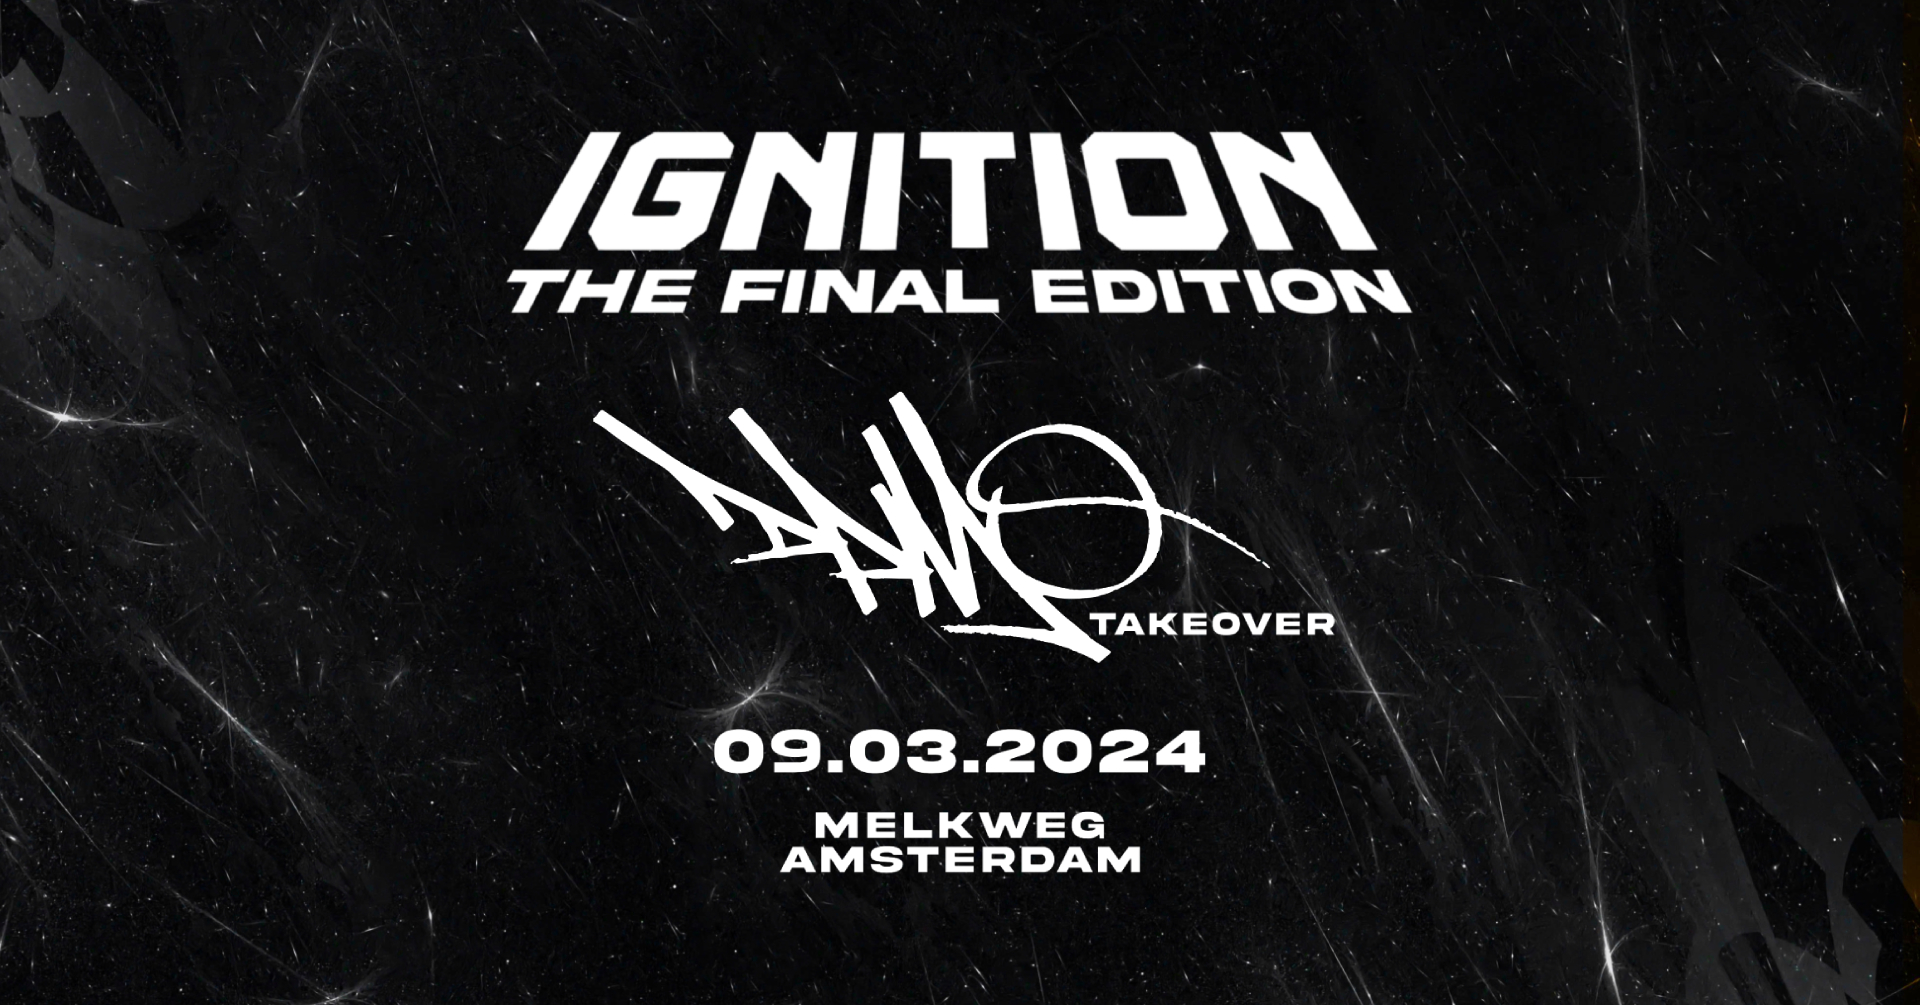 Ignition The Final Edition